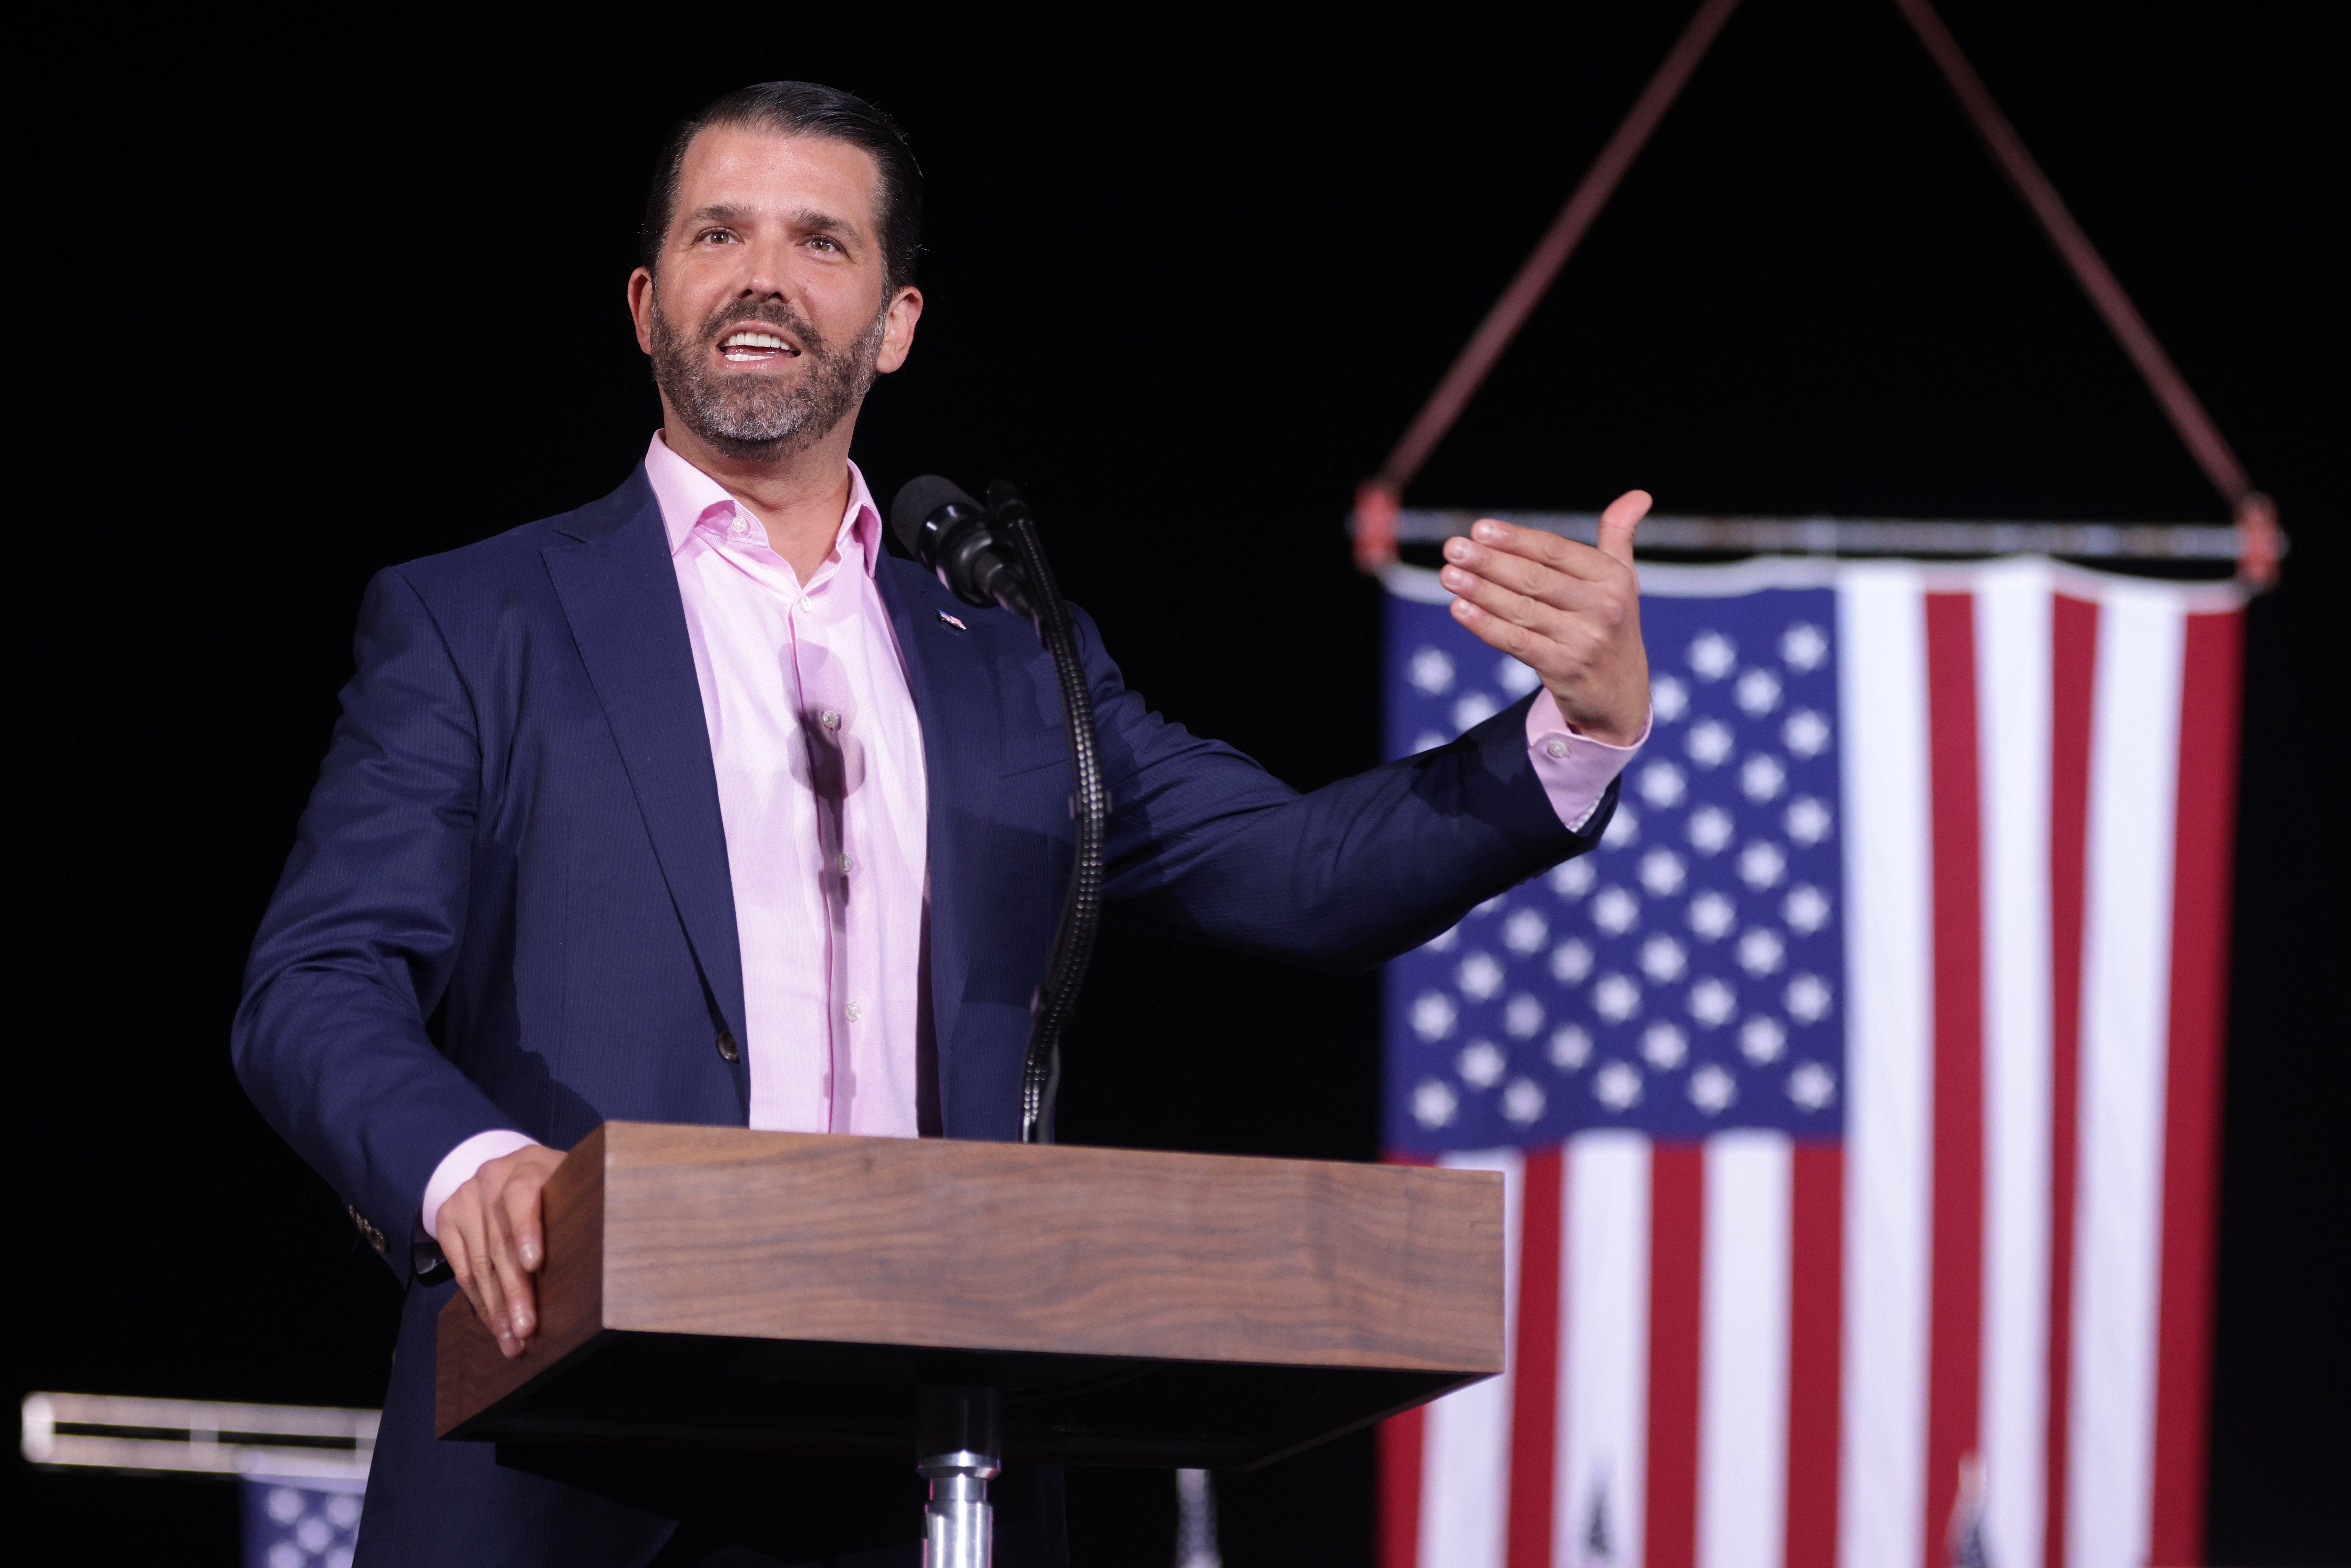 File Image: Donald Trump Jr., son of U.S. President Donald Trump, speaks during a Republican National Committee Victory Rally at Dalton Regional Airport January 4, 2021 in Dalton, Georgia.